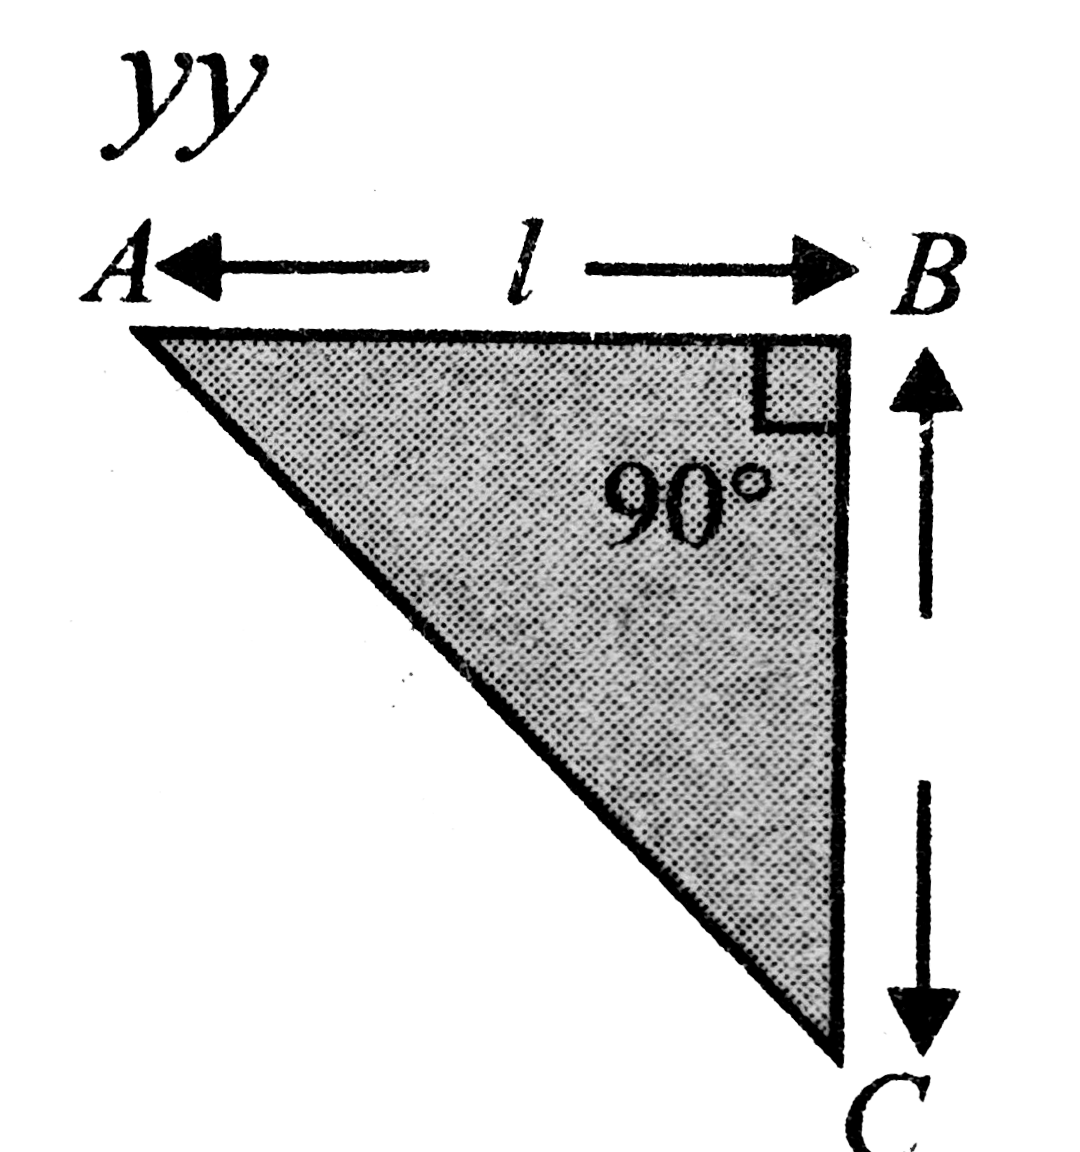 Figure shows a thin metallic triangular sheet ABC. The mass of the sheet is M. The moment of inertia of the sheet about side AC is